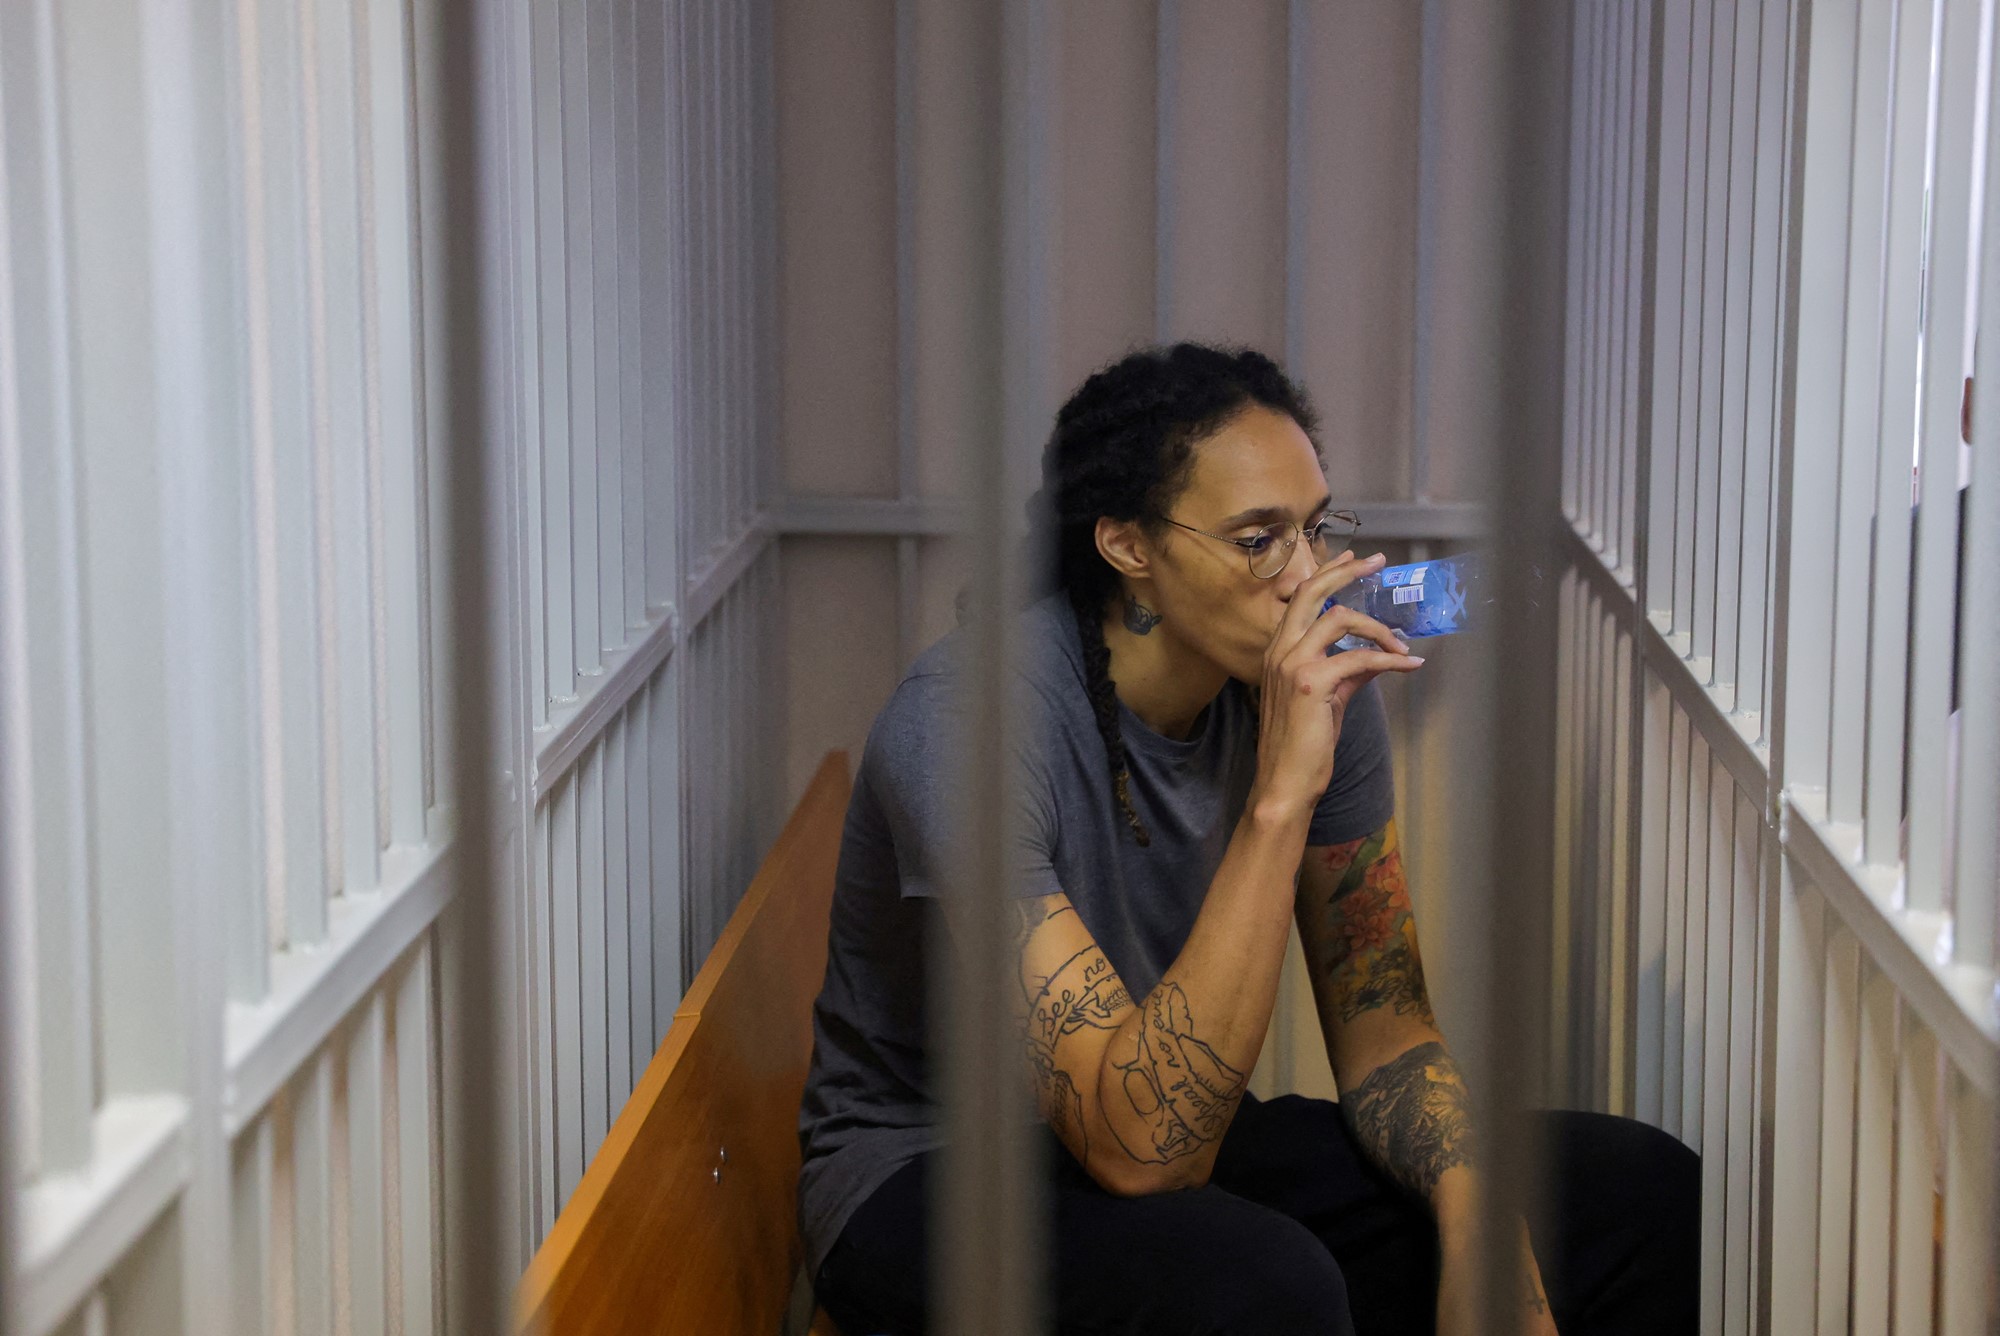 U.S. basketball player Brittney Griner, who was detained at Moscow's Sheremetyevo airport and later charged with illegal possession of cannabis, drinks water inside a defendants' cage after the court's verdict